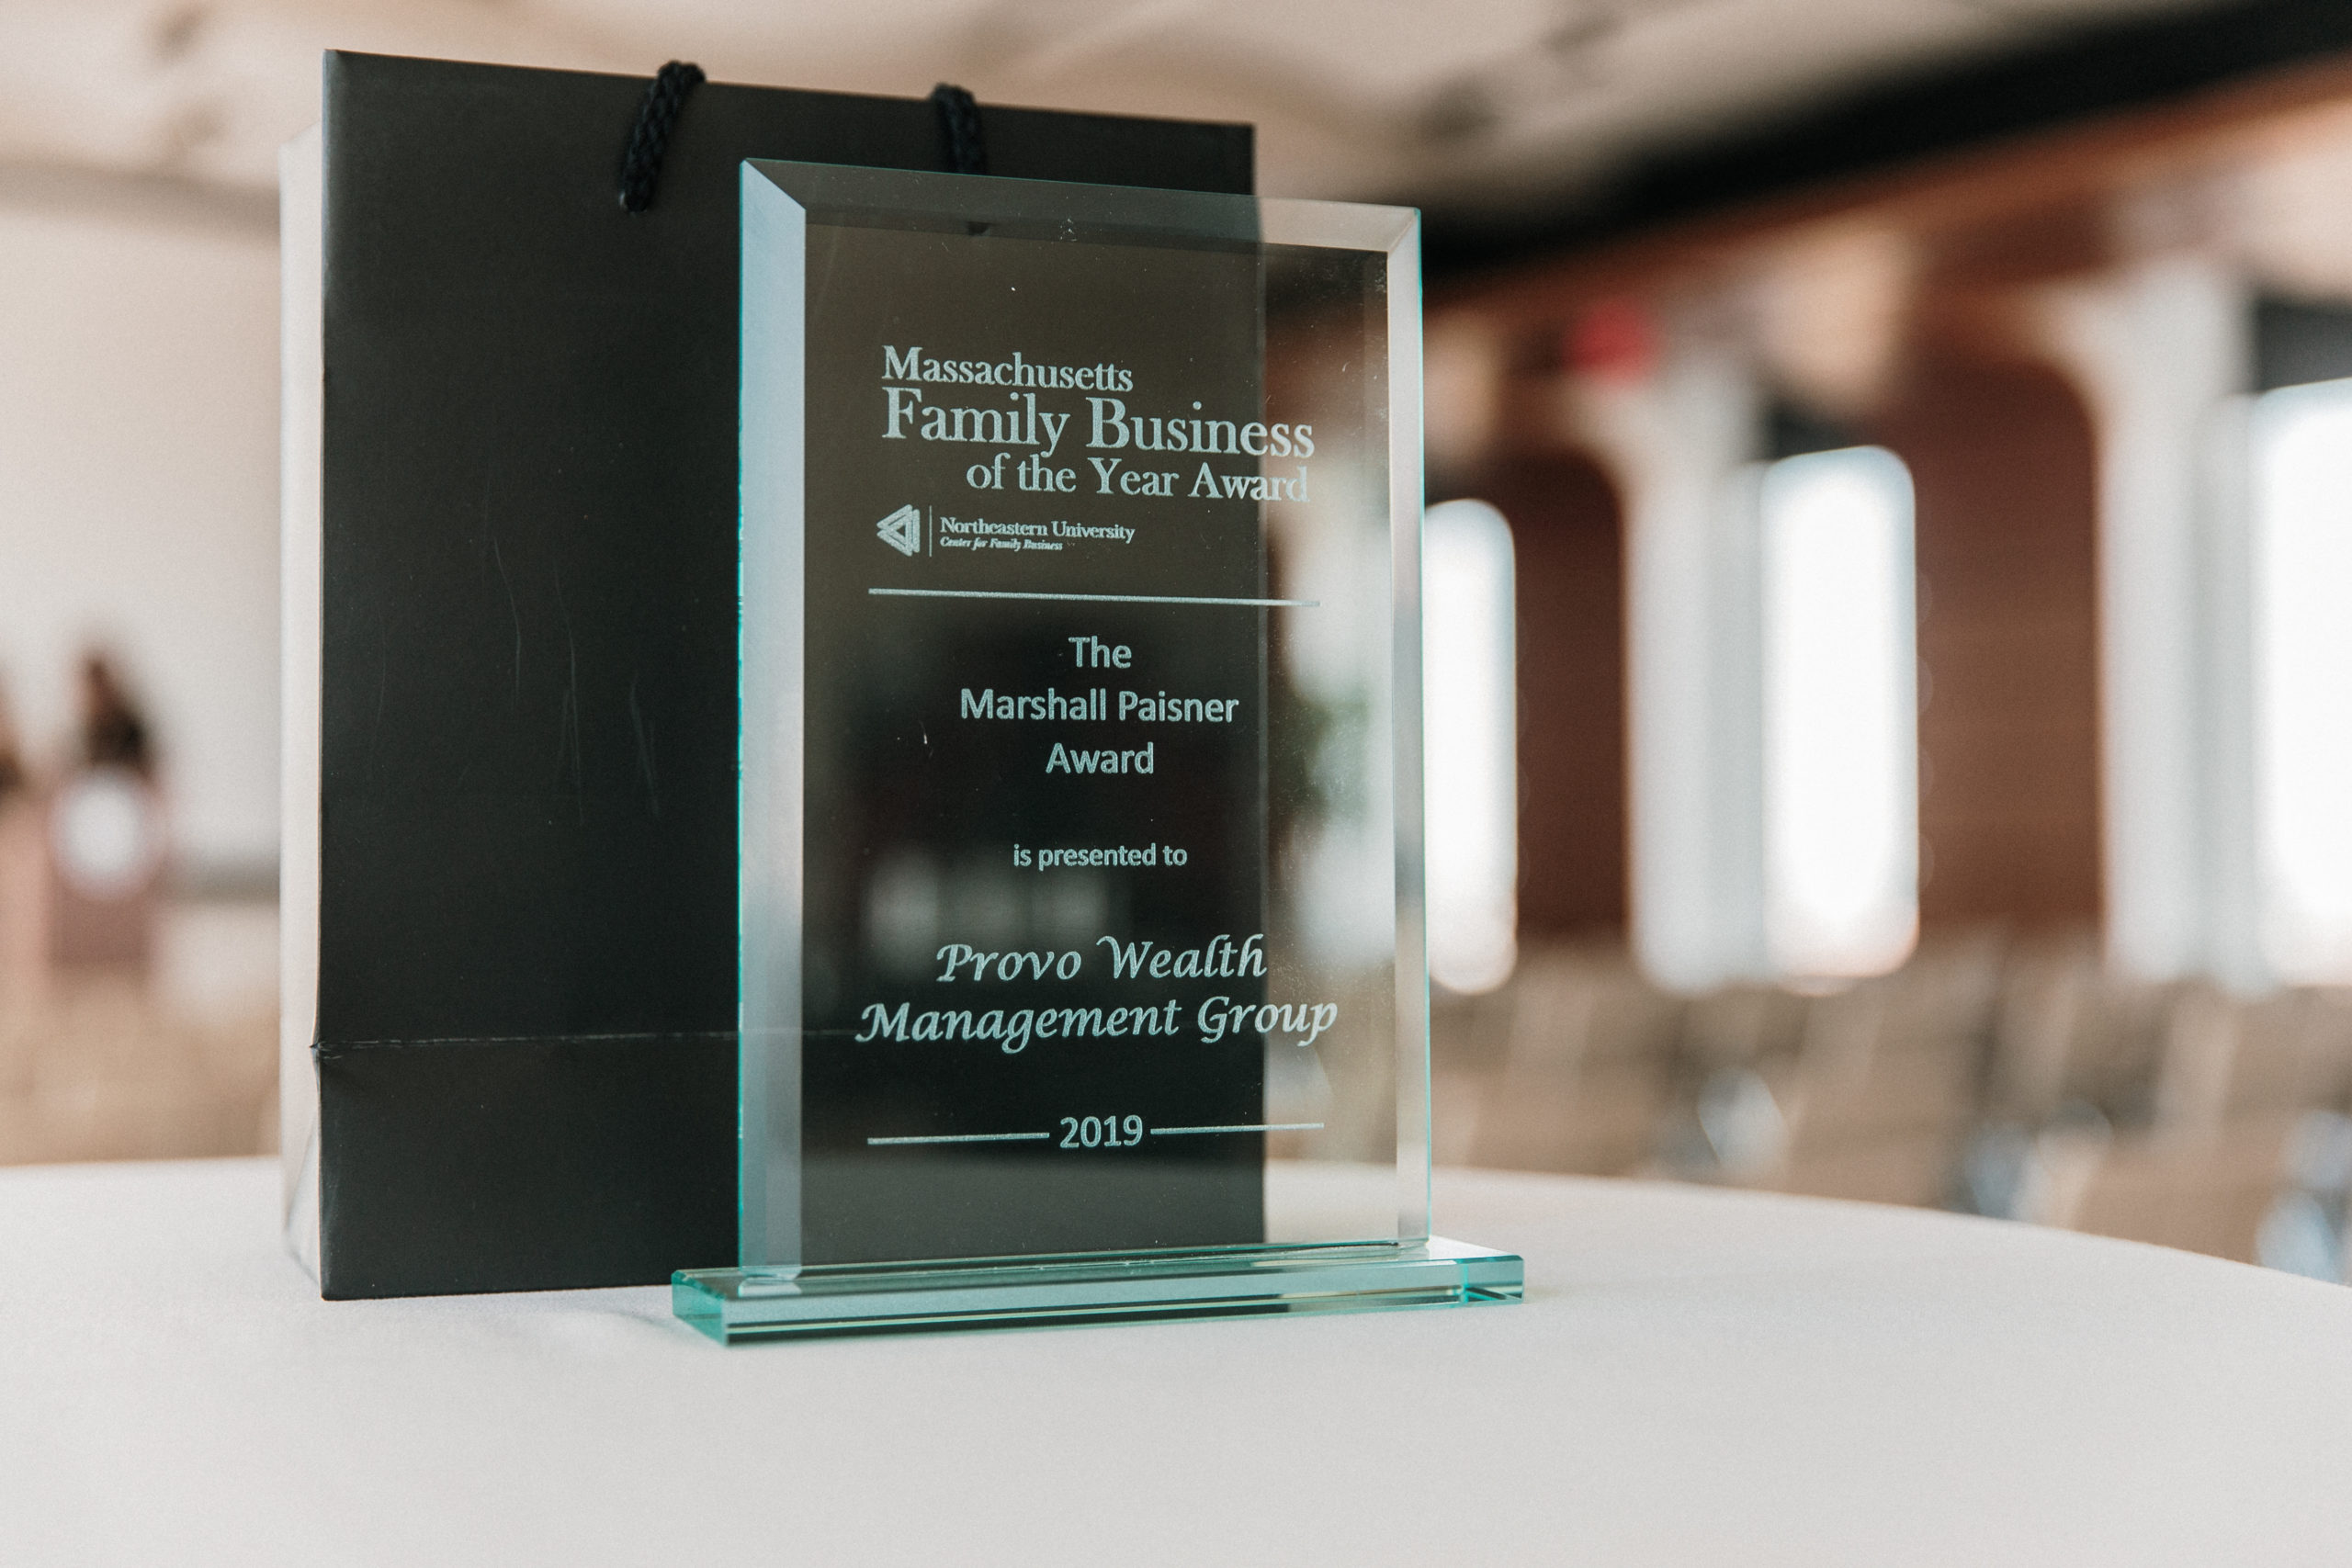 Photo of the Provo Wealth Management Group award